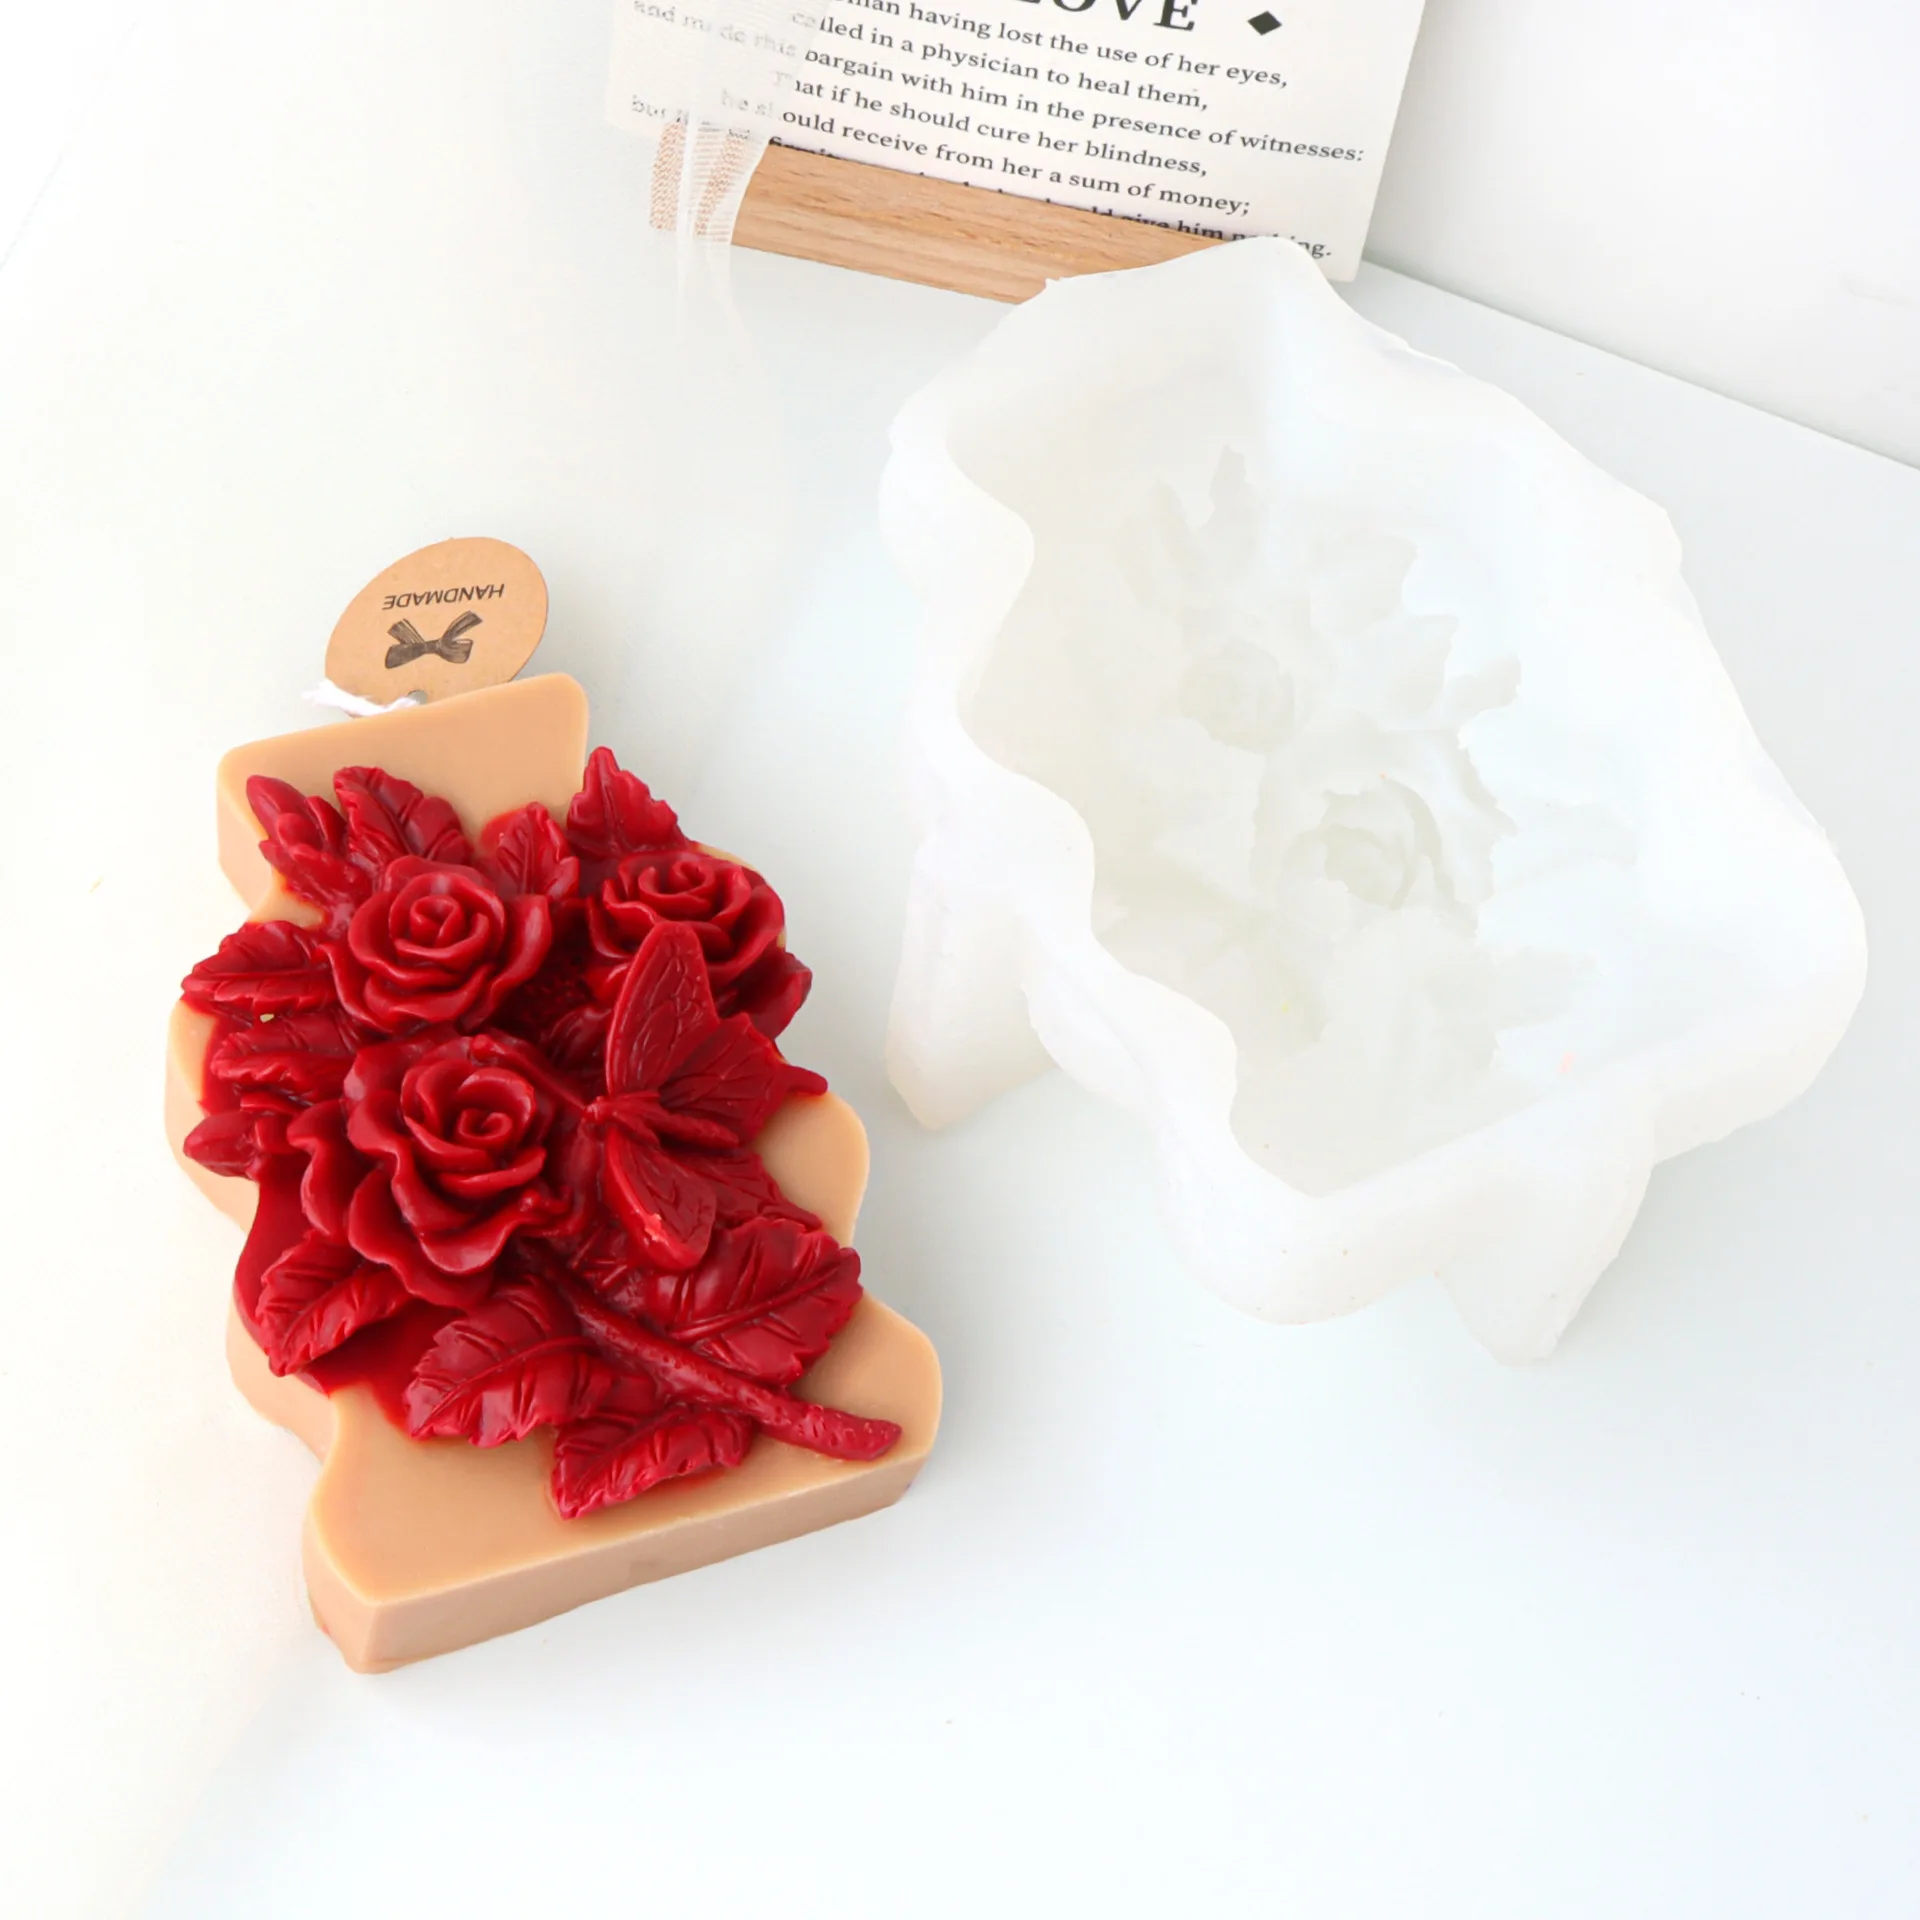 

Relief Rose Sunflower Candle Silicone Mold Gypsum form Carving Art Aromatherapy Plaster Home Decoration Mold Gift Handmade